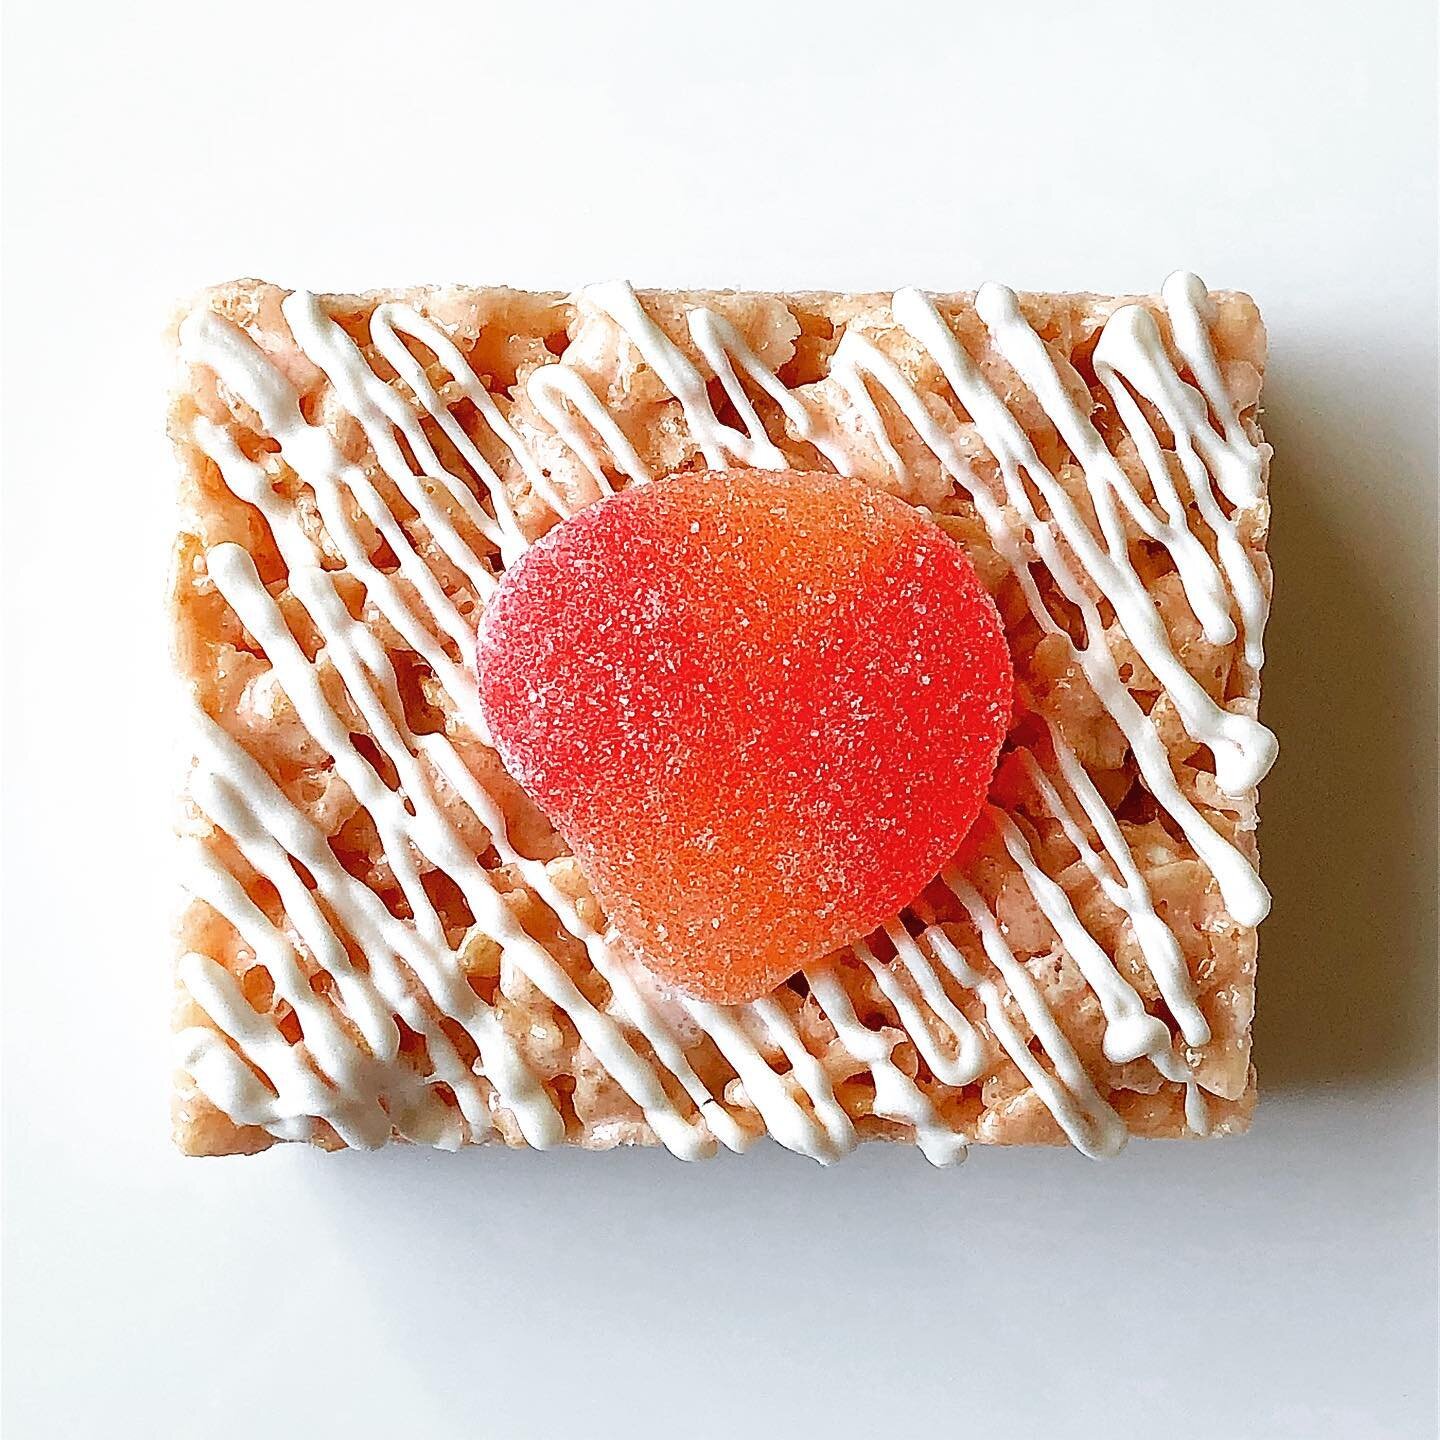 PEACHES AND CREAM RICE CRISPIE TREAT &mdash; July Featured Flavor # 2

Getting a jump on stone fruit season with the sweet summery taste of peaches &amp; cream

-peach flavored rice crispie treat base
-extra marshmallows 
-topped with a vanilla cream